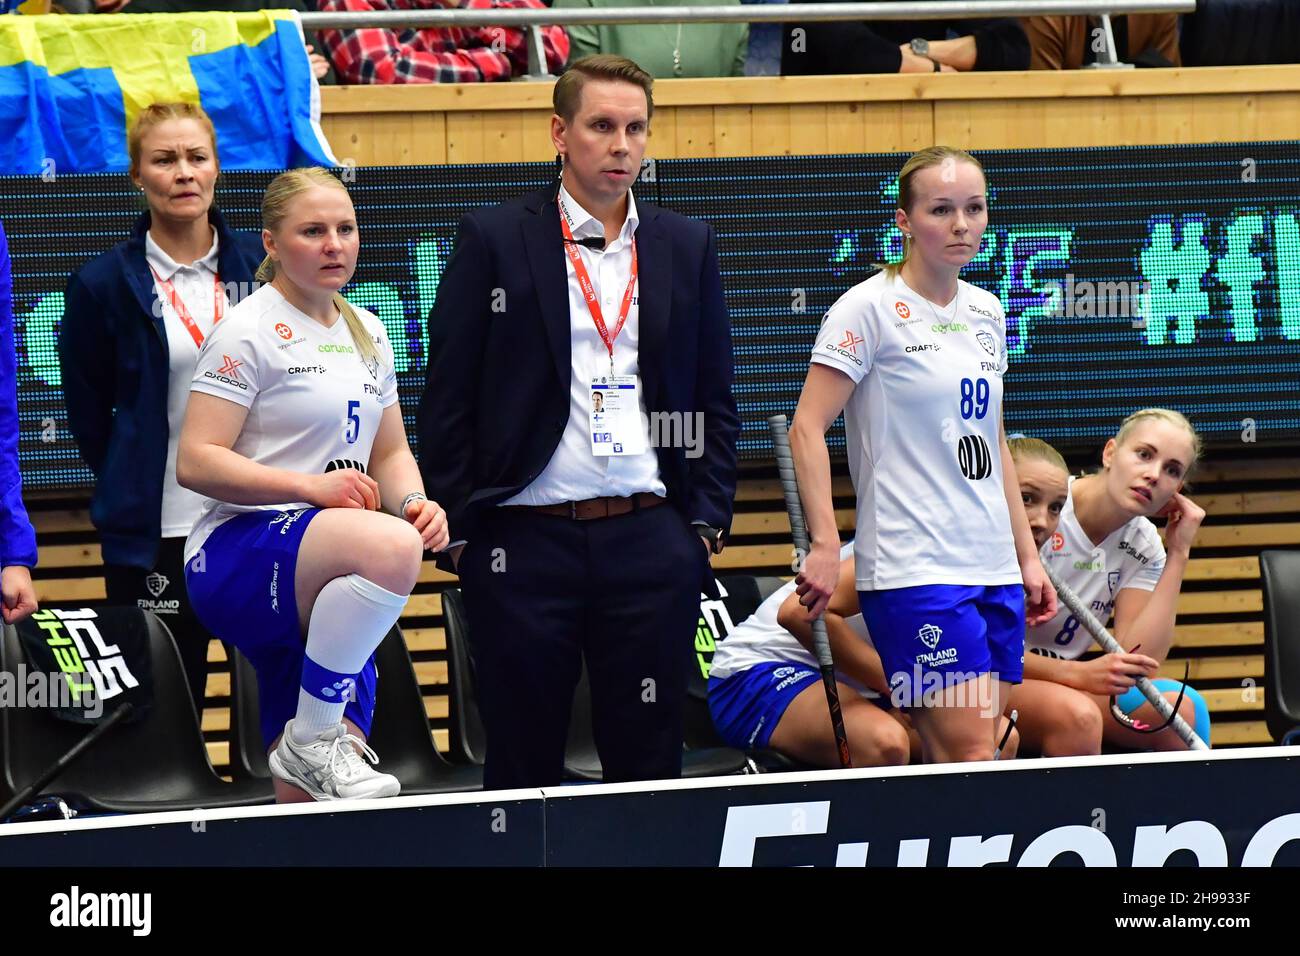 Finland's head coach Lasse Kurronen and players Silja Eskelinen (L) and Krista Nieminen during the final between Finland and Sweden at the Women's Wor Stock Photo